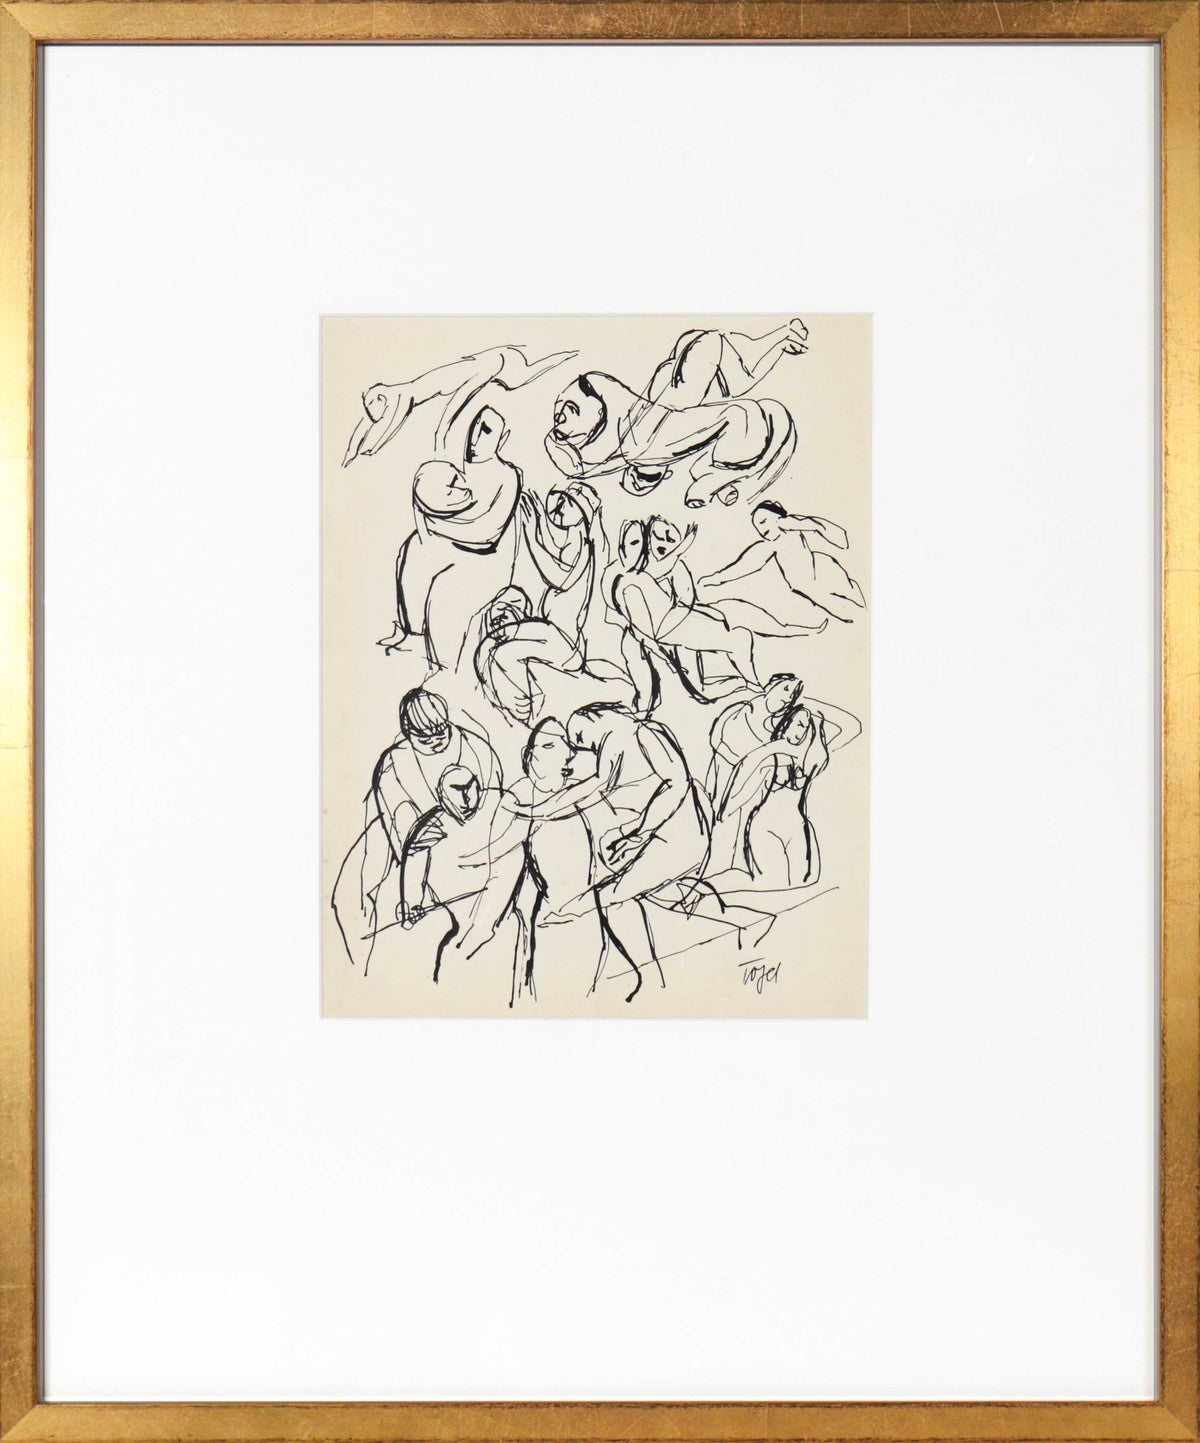 Monochromatic Figurative Scene in Abstraction&lt;br&gt;20th Century Ink&lt;br&gt;&lt;br&gt;#11261